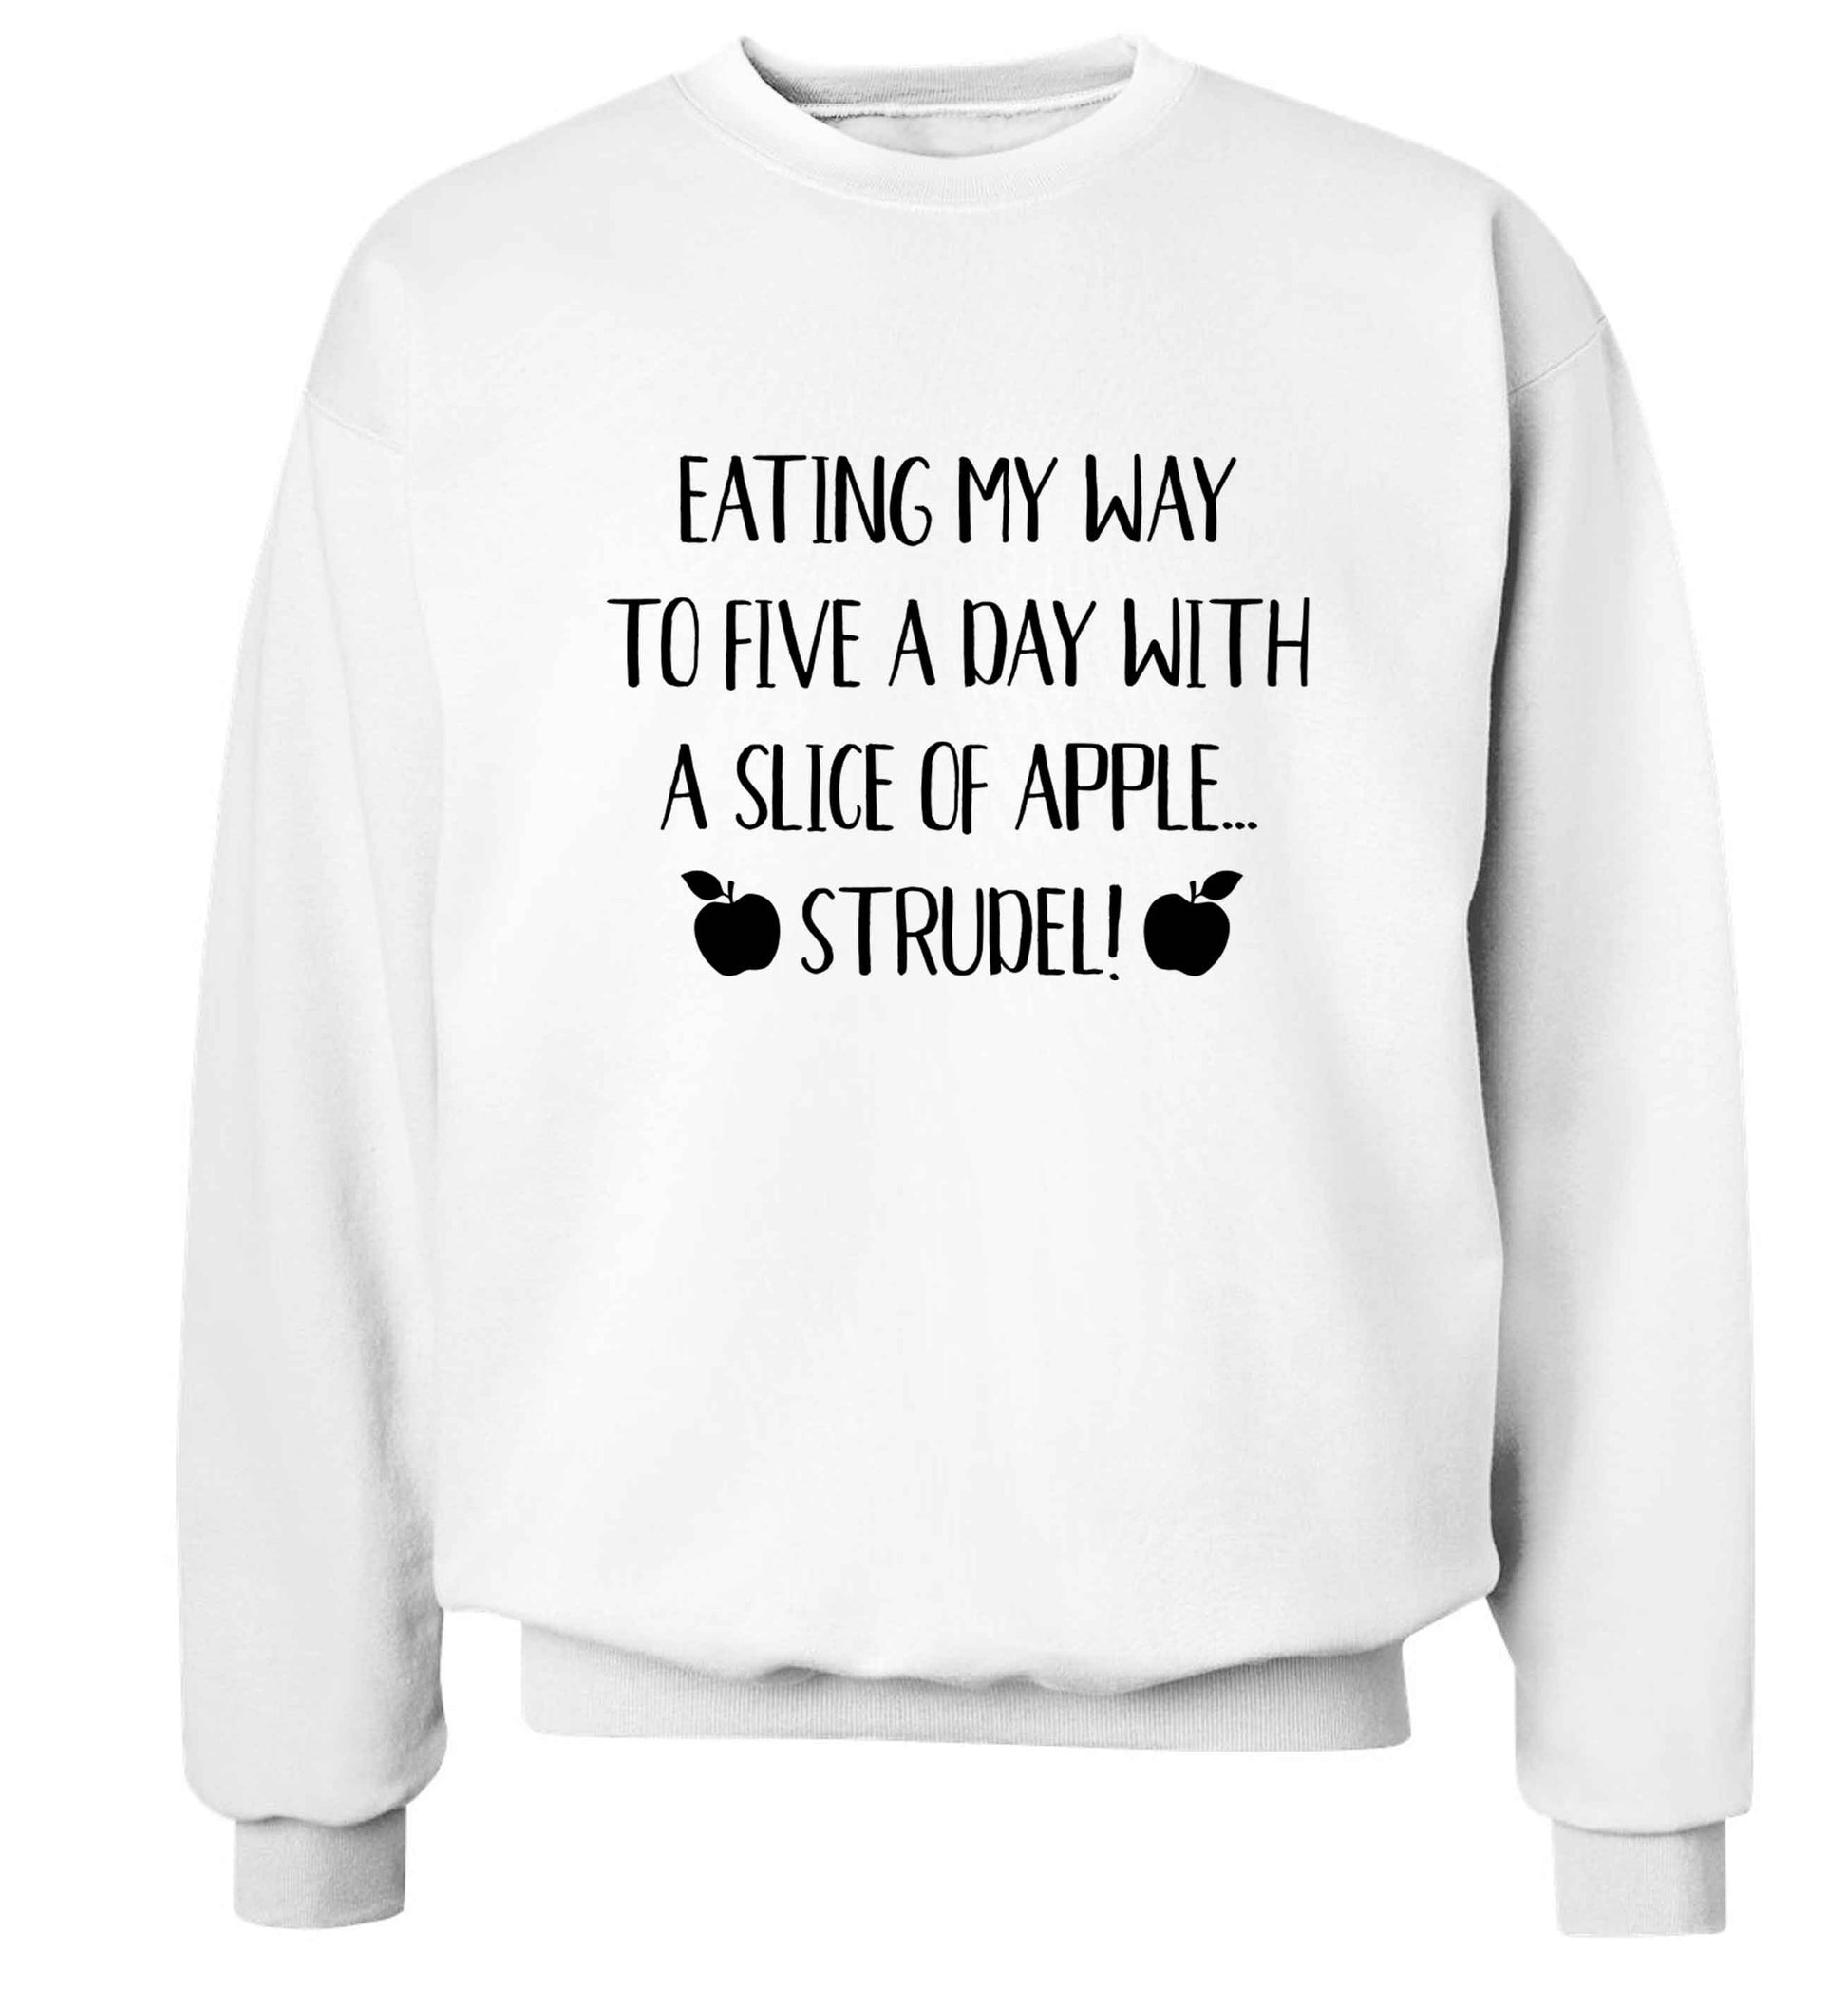 Eating my way to five a day with a slice of apple strudel Adult's unisex white Sweater 2XL